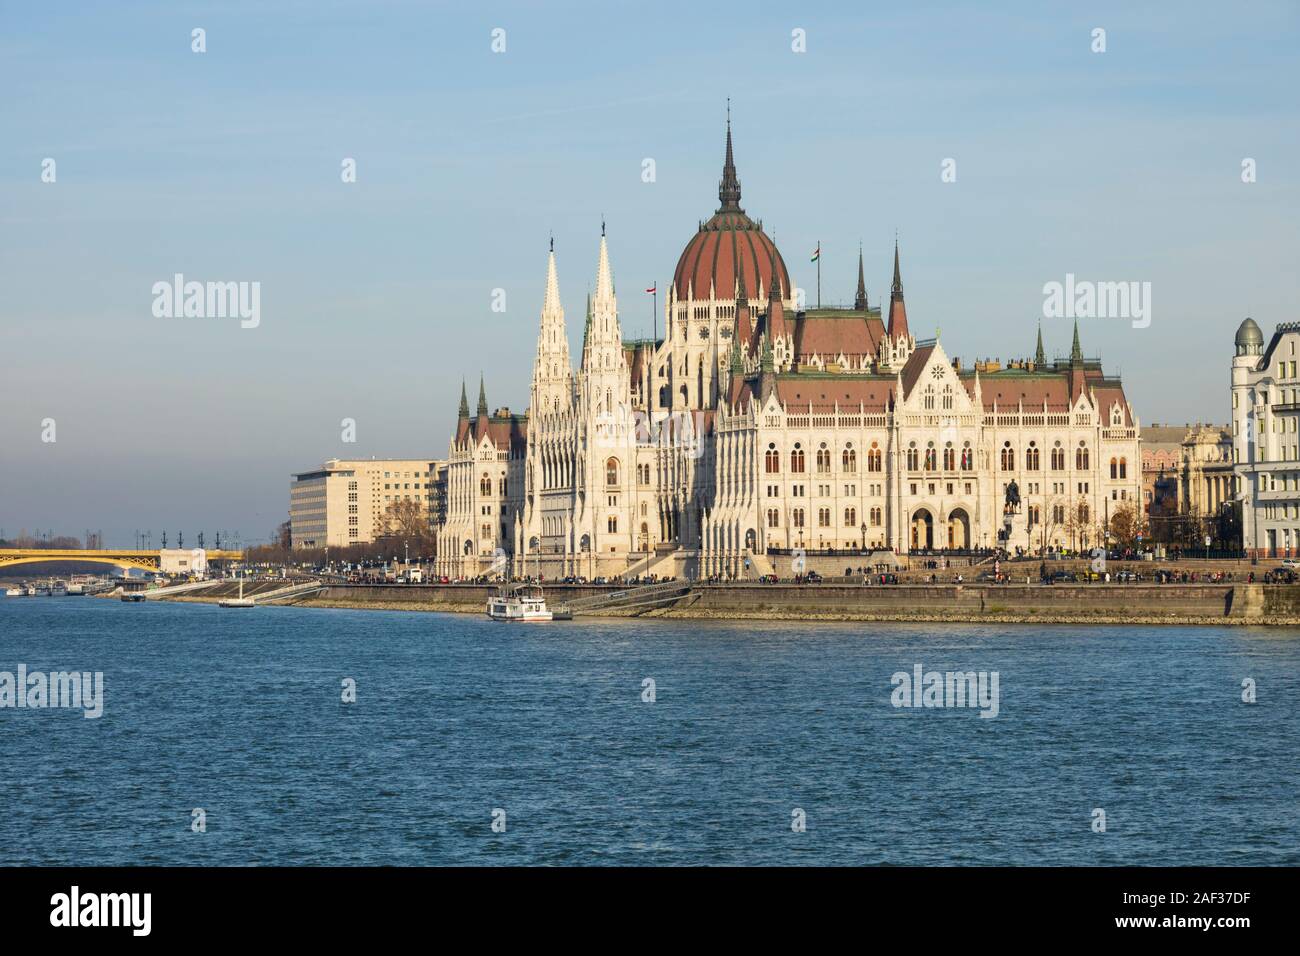 The Hungarian Parliament Building, Orszaghaz, over the River Danube. Winter in Budapest, Hungary. December 2019 Stock Photo